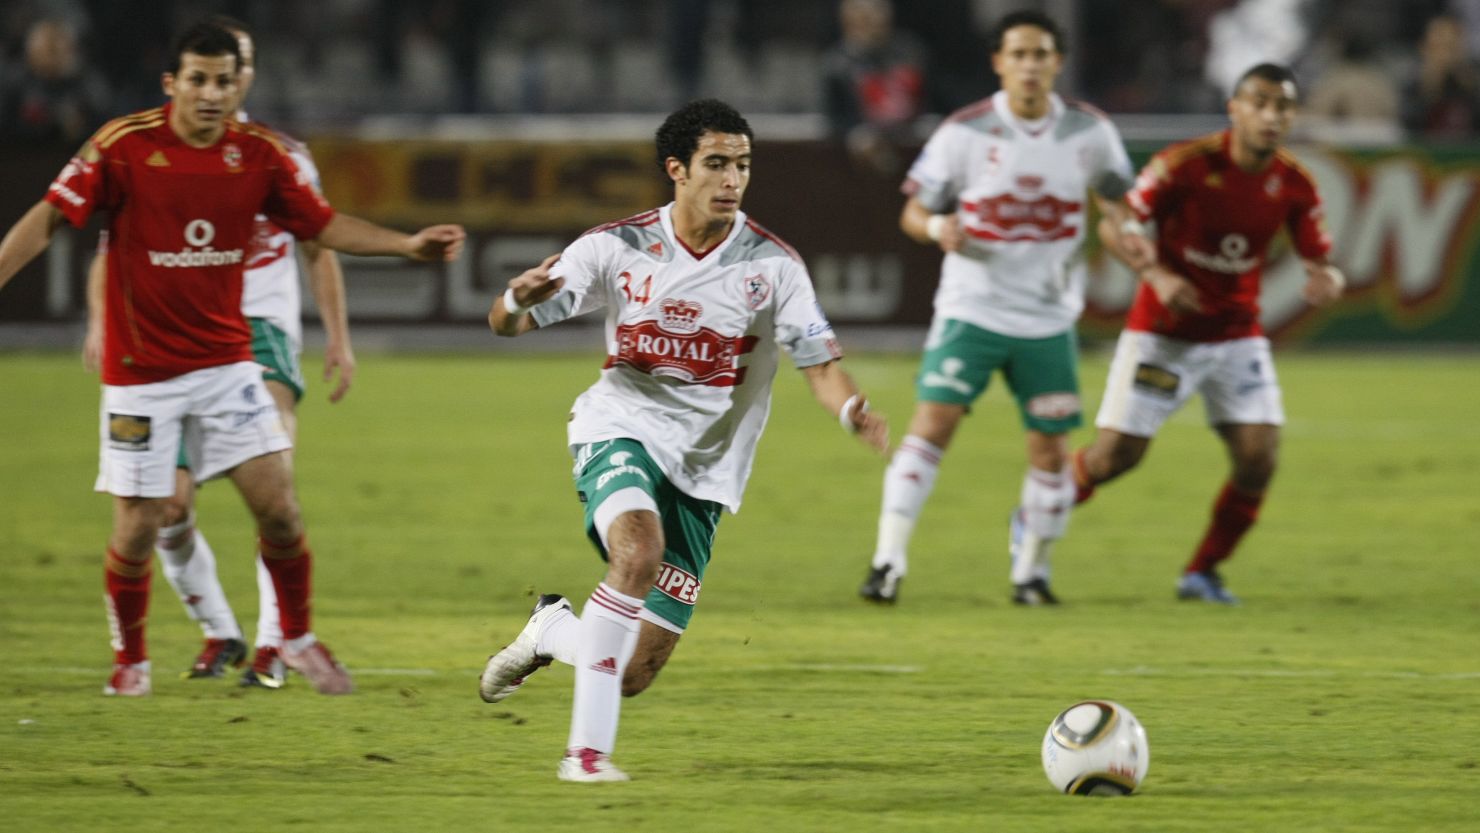 El Fiki waived fees for private stations to broadcast Egyptian league matches, such as this one between Zamalek and Al-Ahly.